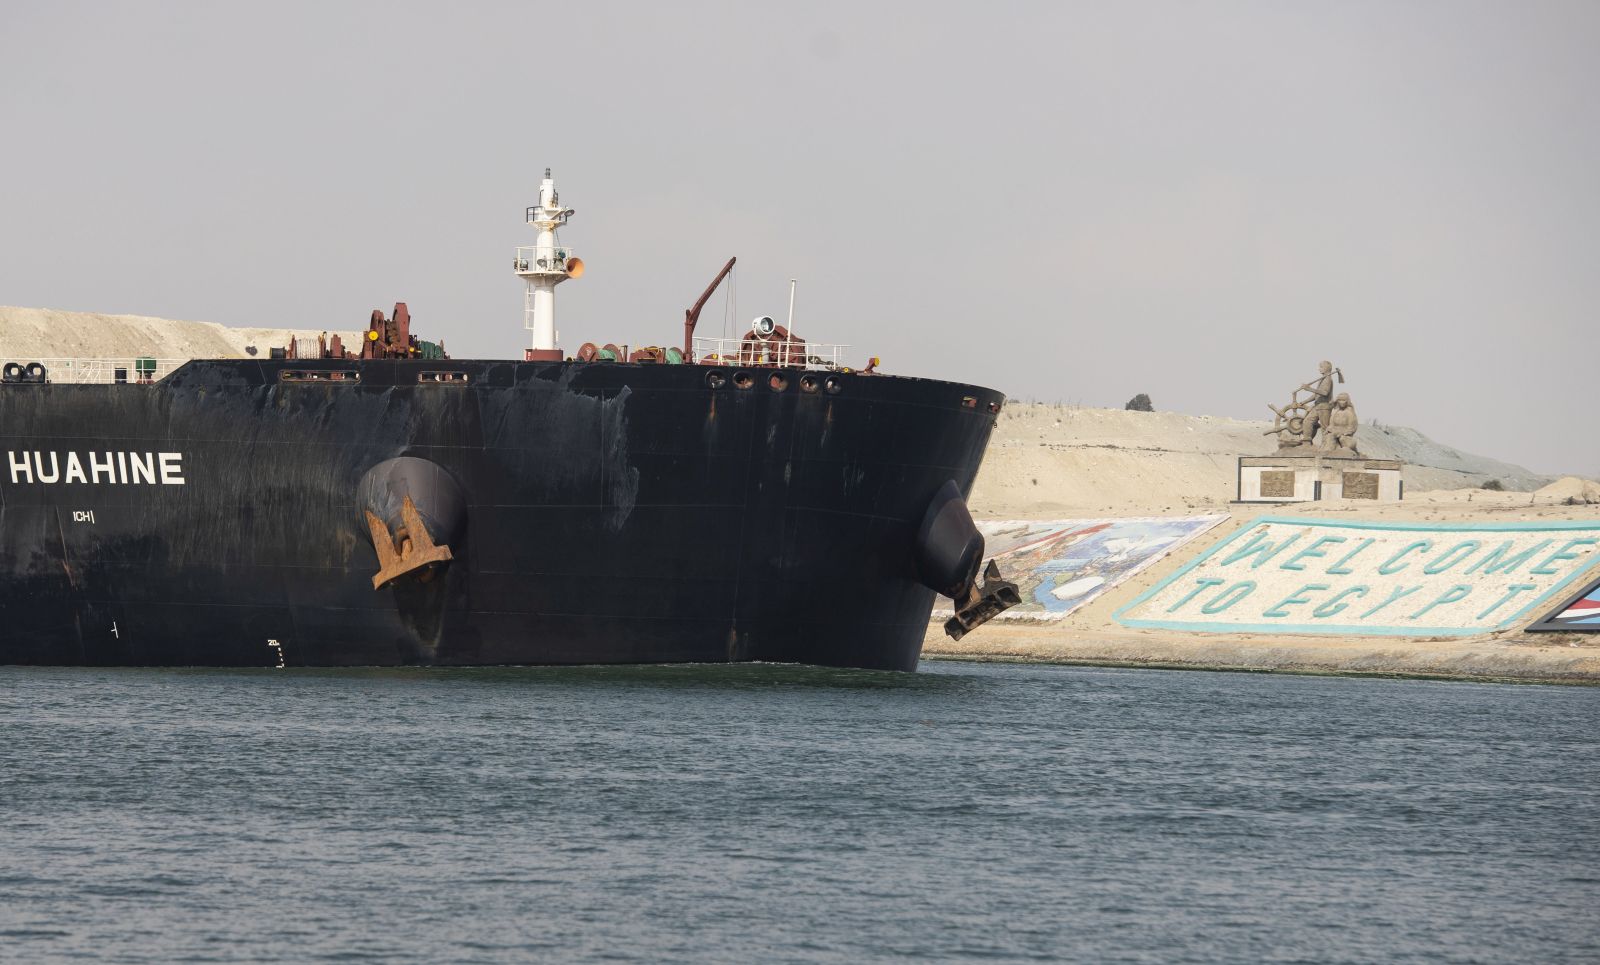 epa09106700 A view of a ship as it starts moving in the Suez Canal, in Ismalia, Egypt, 30 March 2021. The Suez Canal Authority on 29 March said that traffic is to resume after the large container ship 'Ever Given' was refloated and 43 vessels had resumed transit so far from the Great Bitter Lake, which separates two sections of the canal. The Ever Given ran aground in the Suez Canal on 23 March, causing a huge traffic backlog of ships.  EPA/Mohamed Hossam